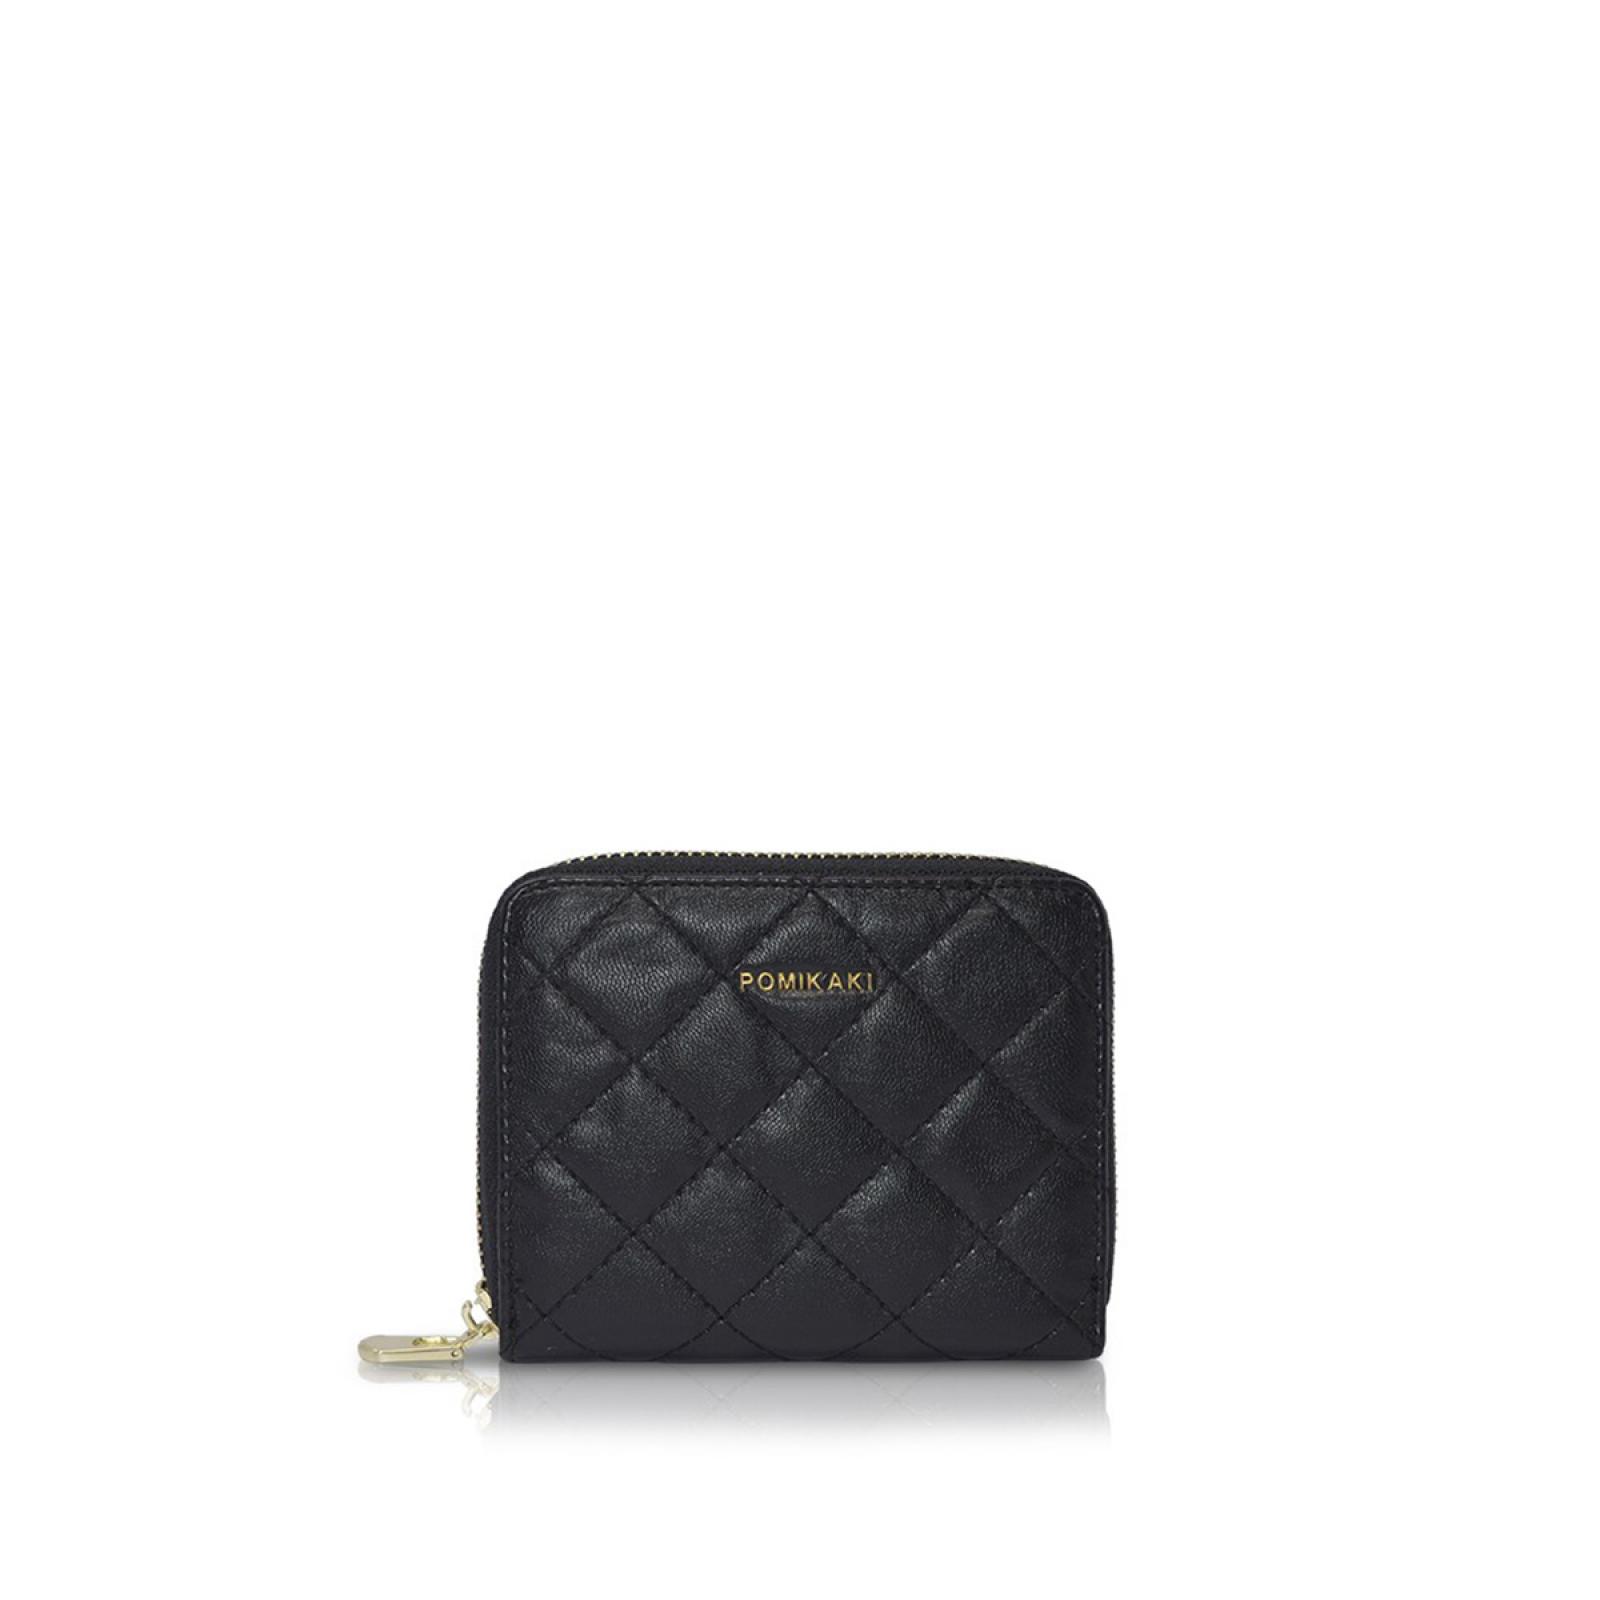 Pomikaki Alison Small Quilted Wallet - 1